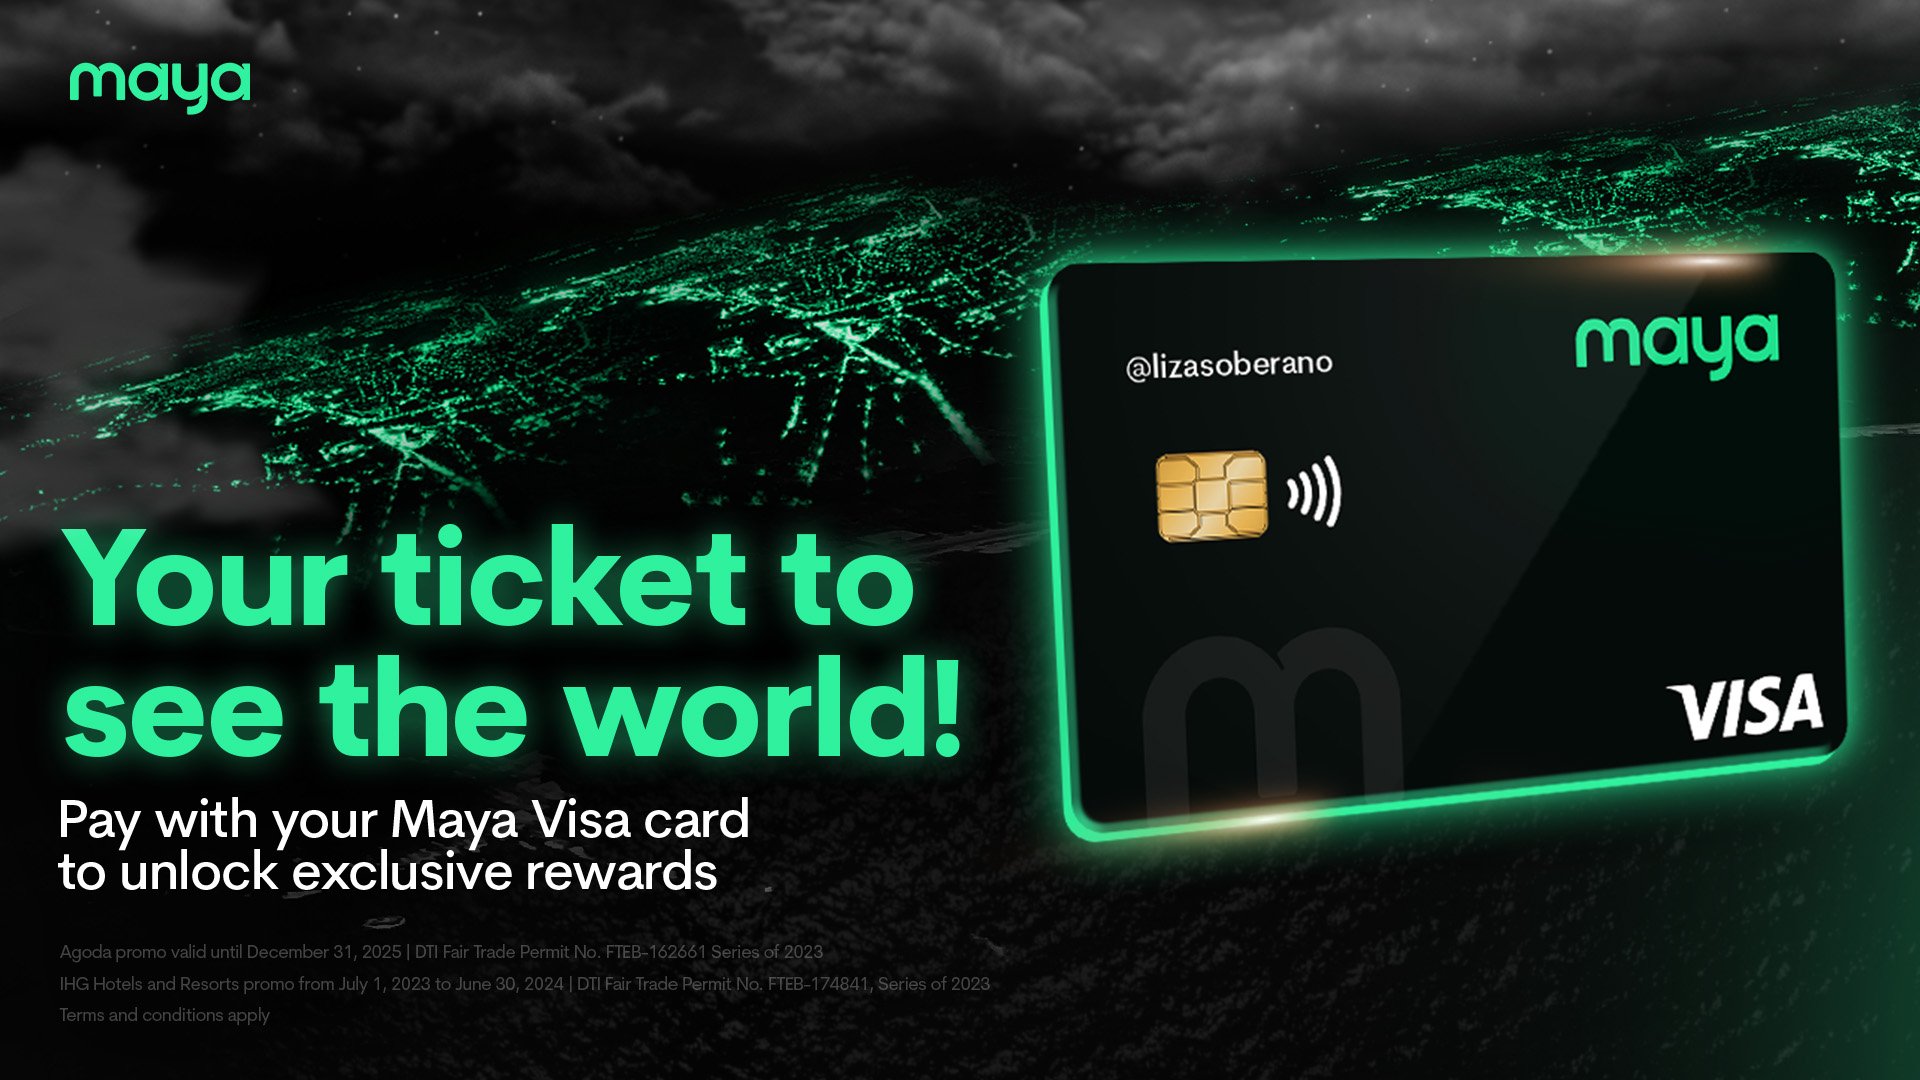 Travel and Save with your Maya Visa Card!